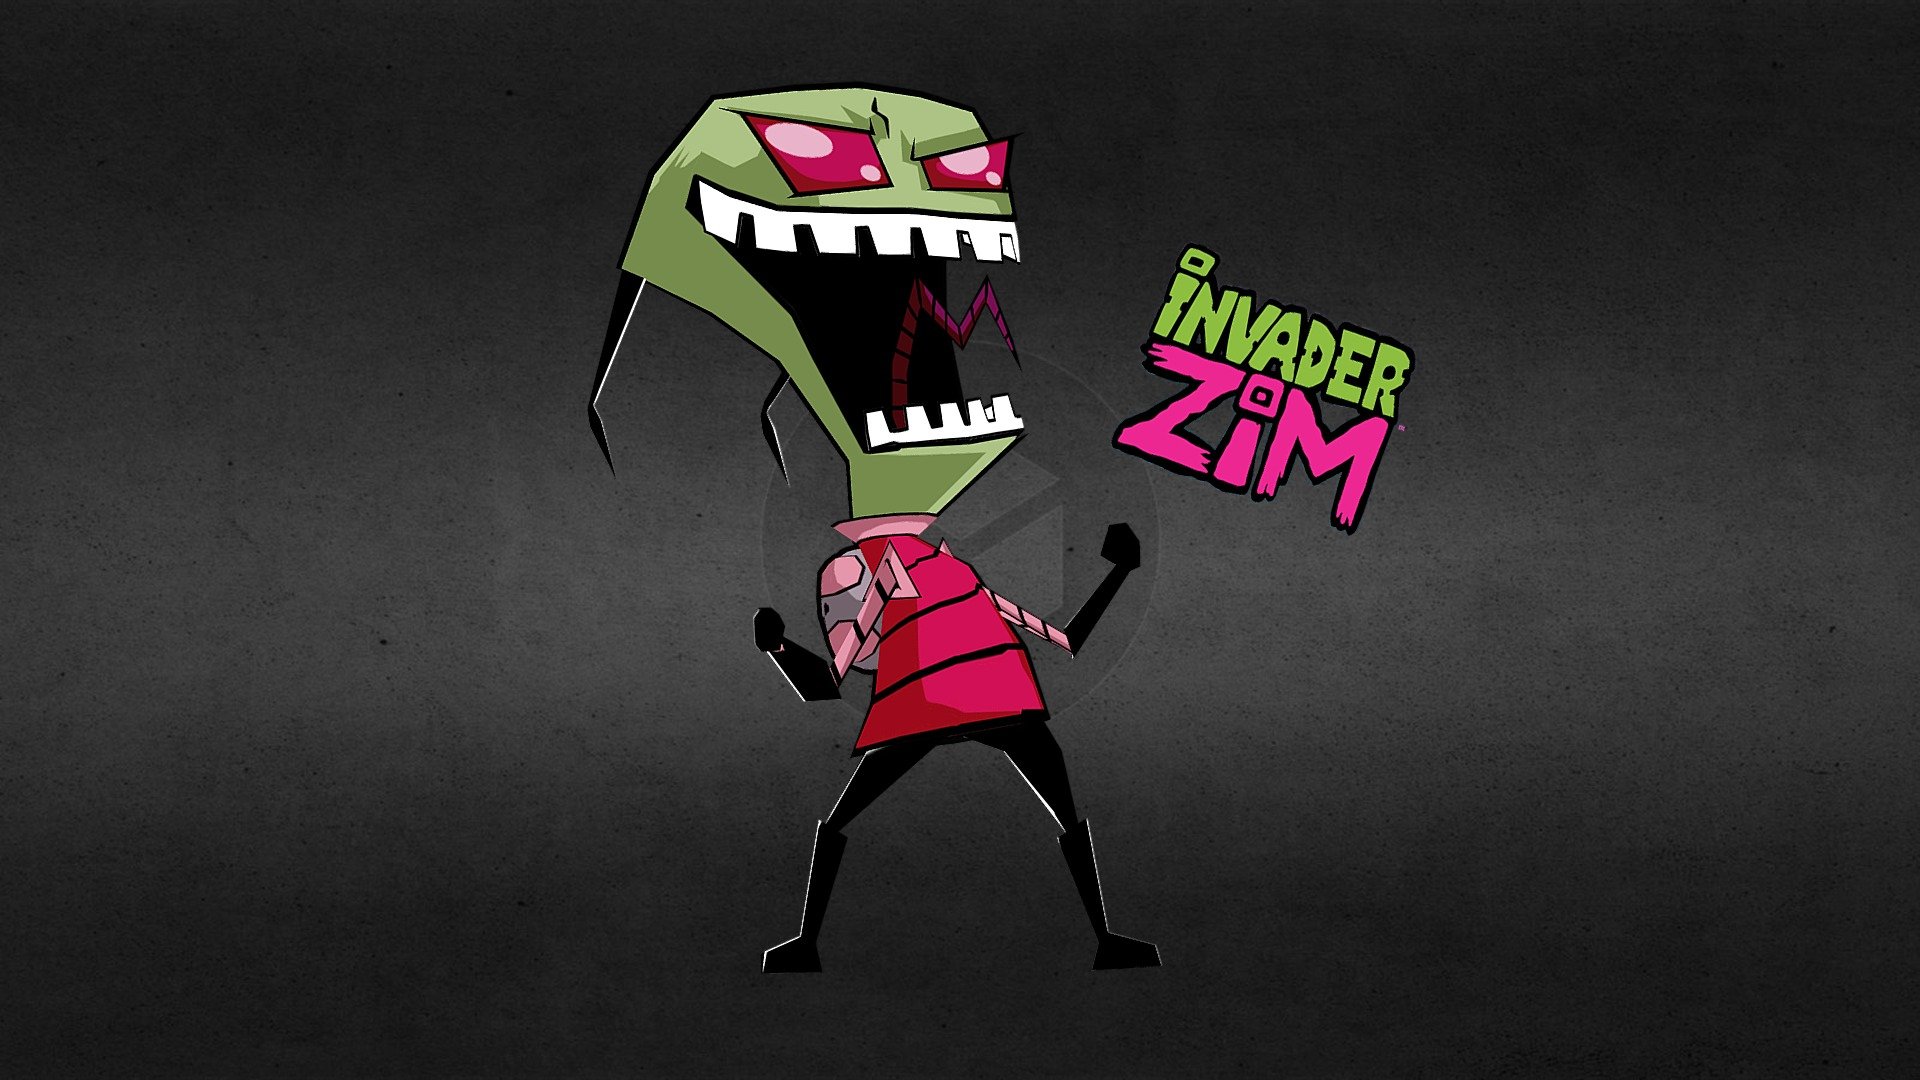 if you like zim, you may also like DIB :D https://sketchfab.com/models/3b6763b812cf4b8e8f5d7887b5e885b9

Updated&mdash;outline added

are you a fan of Invader zim? XD well me too! i wish nickelodeon bring it back while im still alive XD

6 hours of work, modelled in blender - Invader ZIM Lowpoly - 3D model by Deathly 3d model